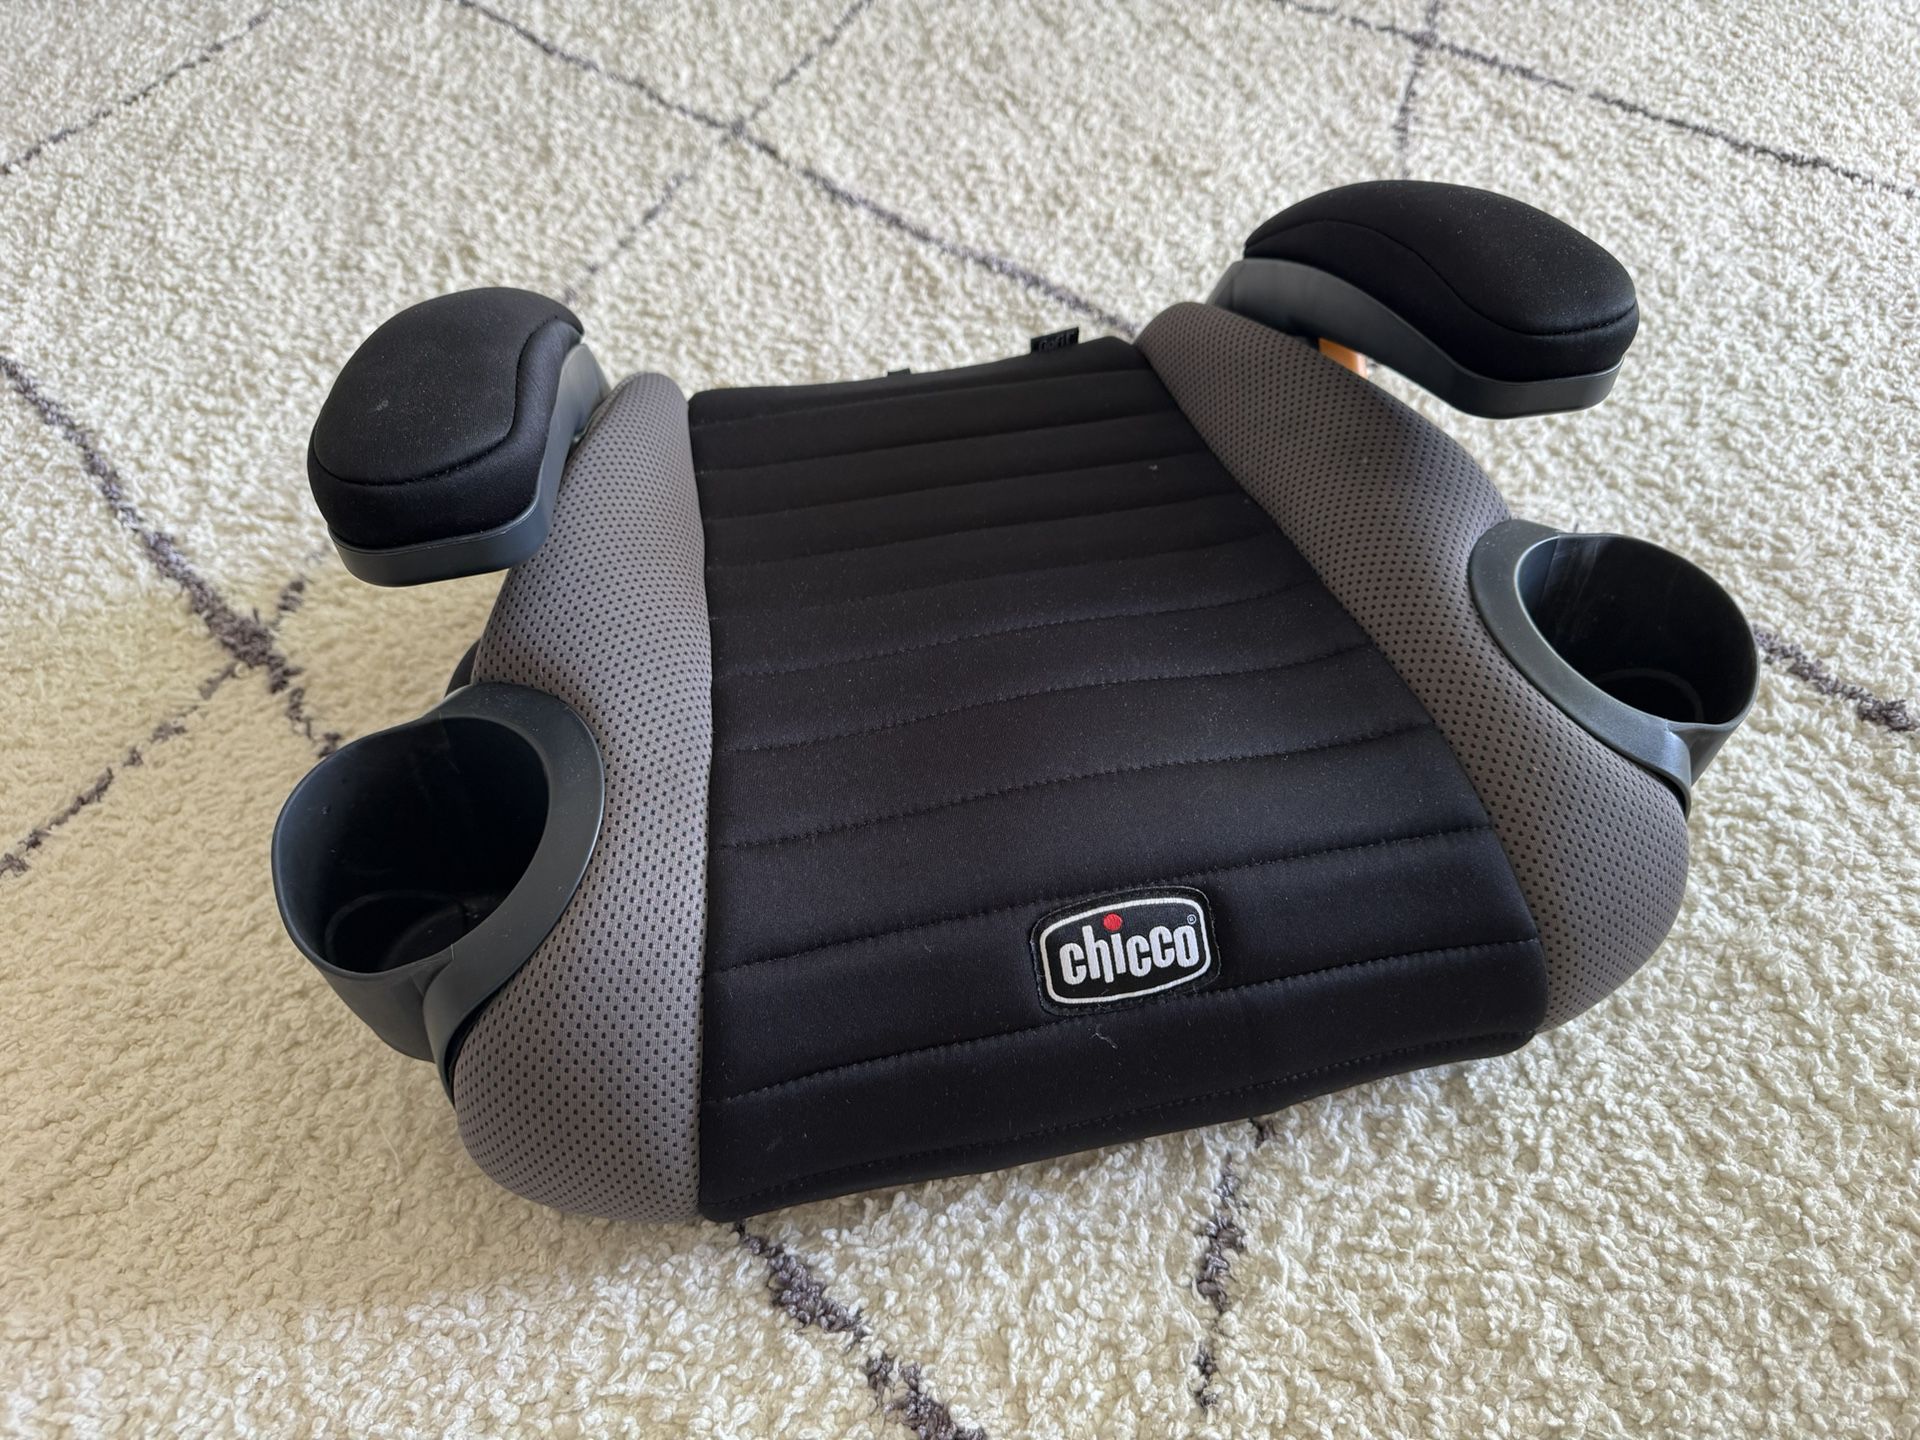 Chicco Go Fit Booster Car Seat